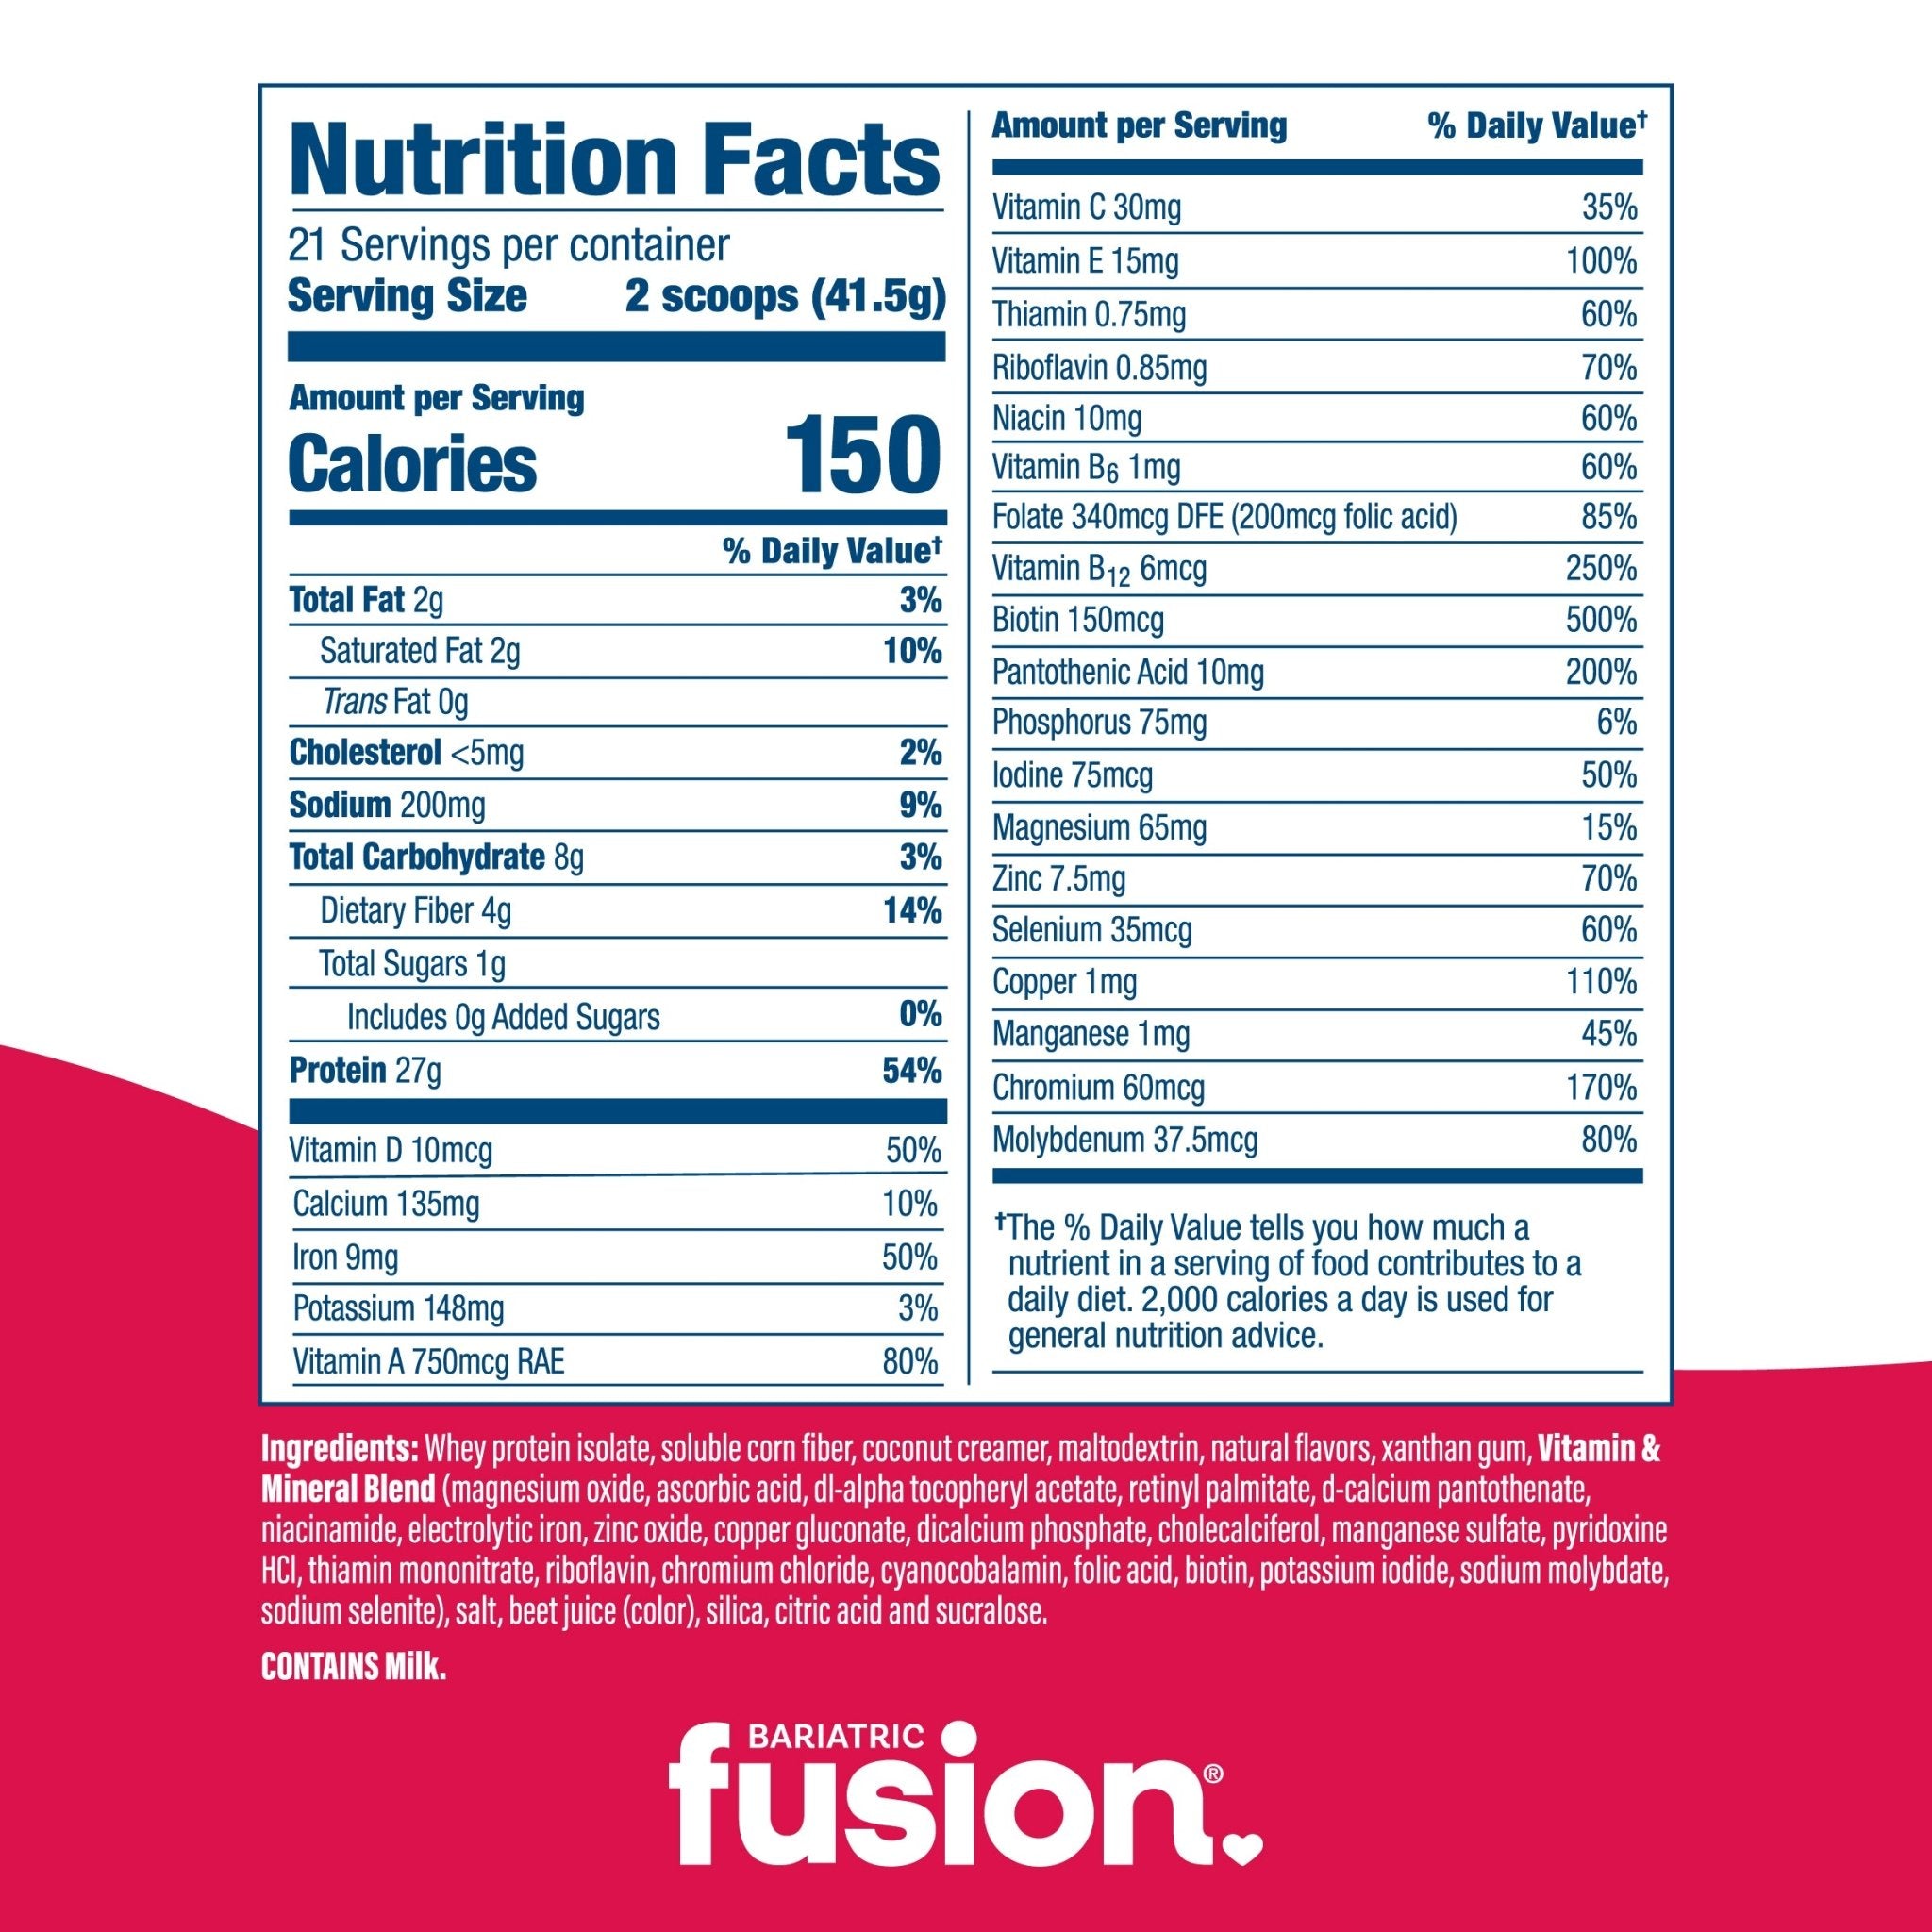 Bariatric Fusion Strawberry High Protein Meal Replacement nutrition facts.